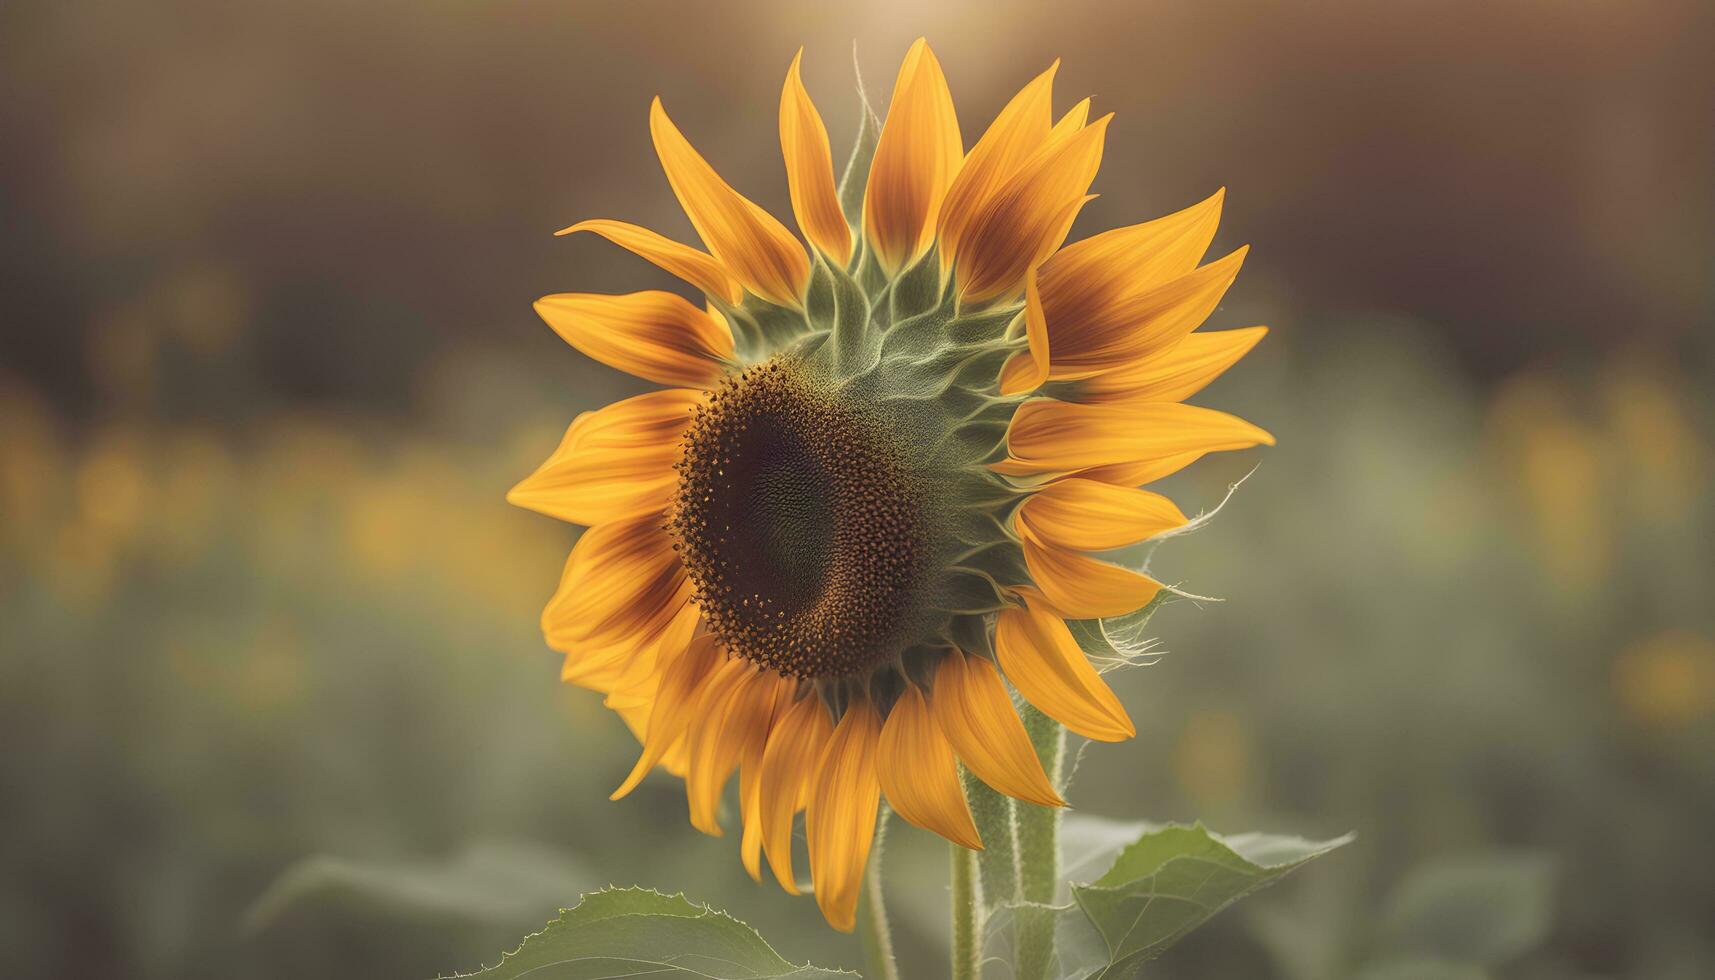 AI generated a sunflower is standing in a field with a blurry background photo